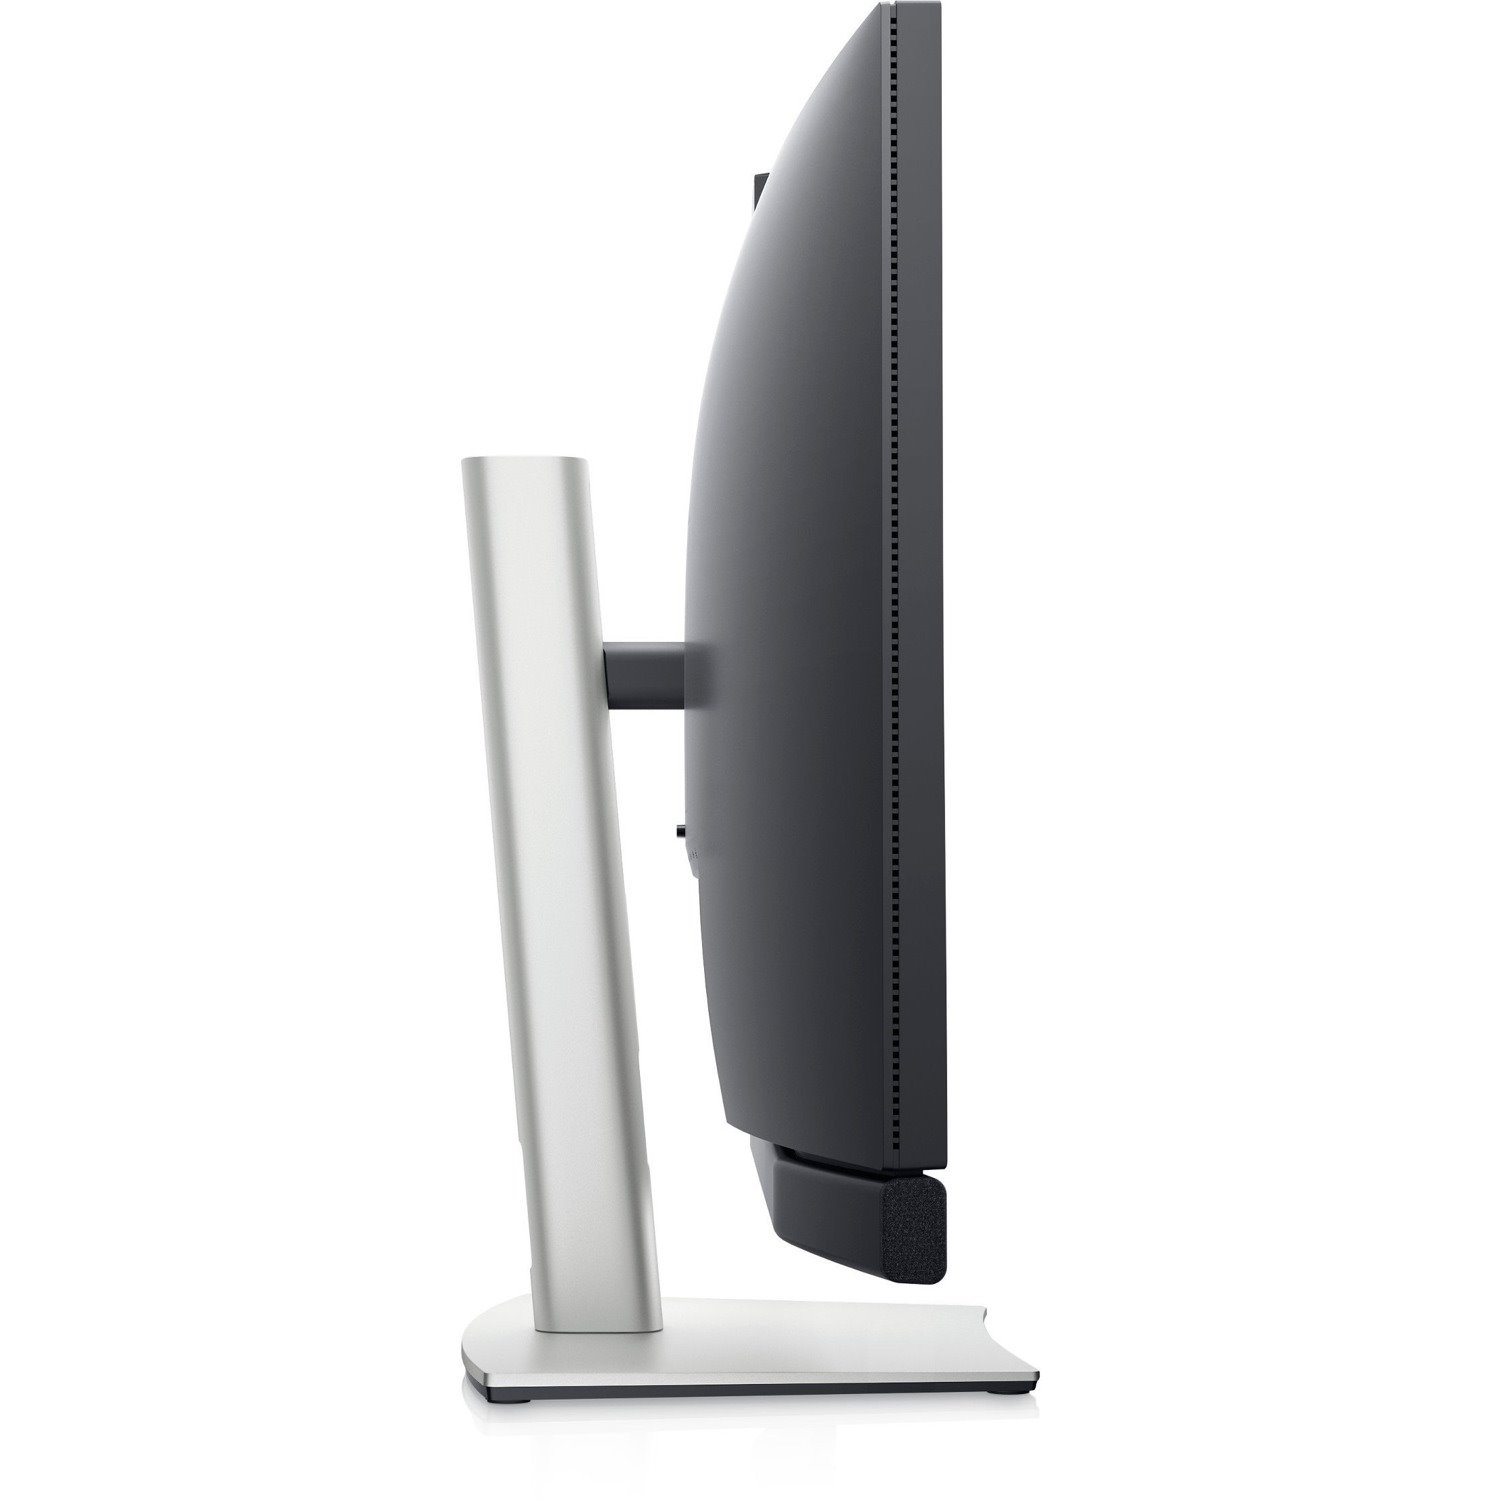 Dell C3422WE 34.1" Webcam WQHD Curved Screen Edge WLED LCD Monitor - 21:9 - Platinum Silver